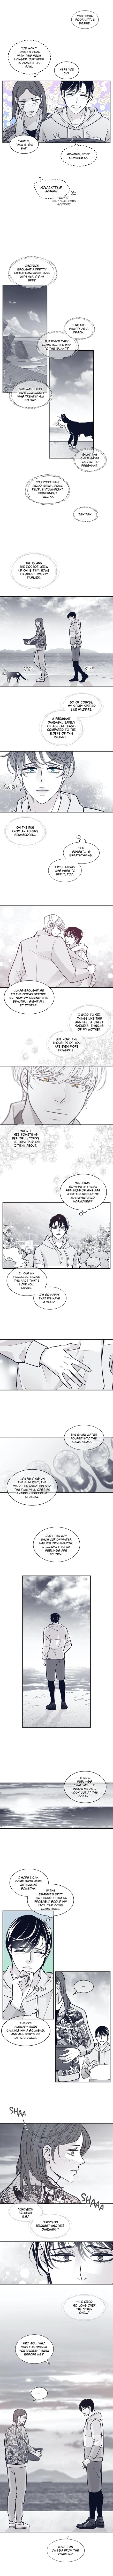 Gold Gray - Page 3